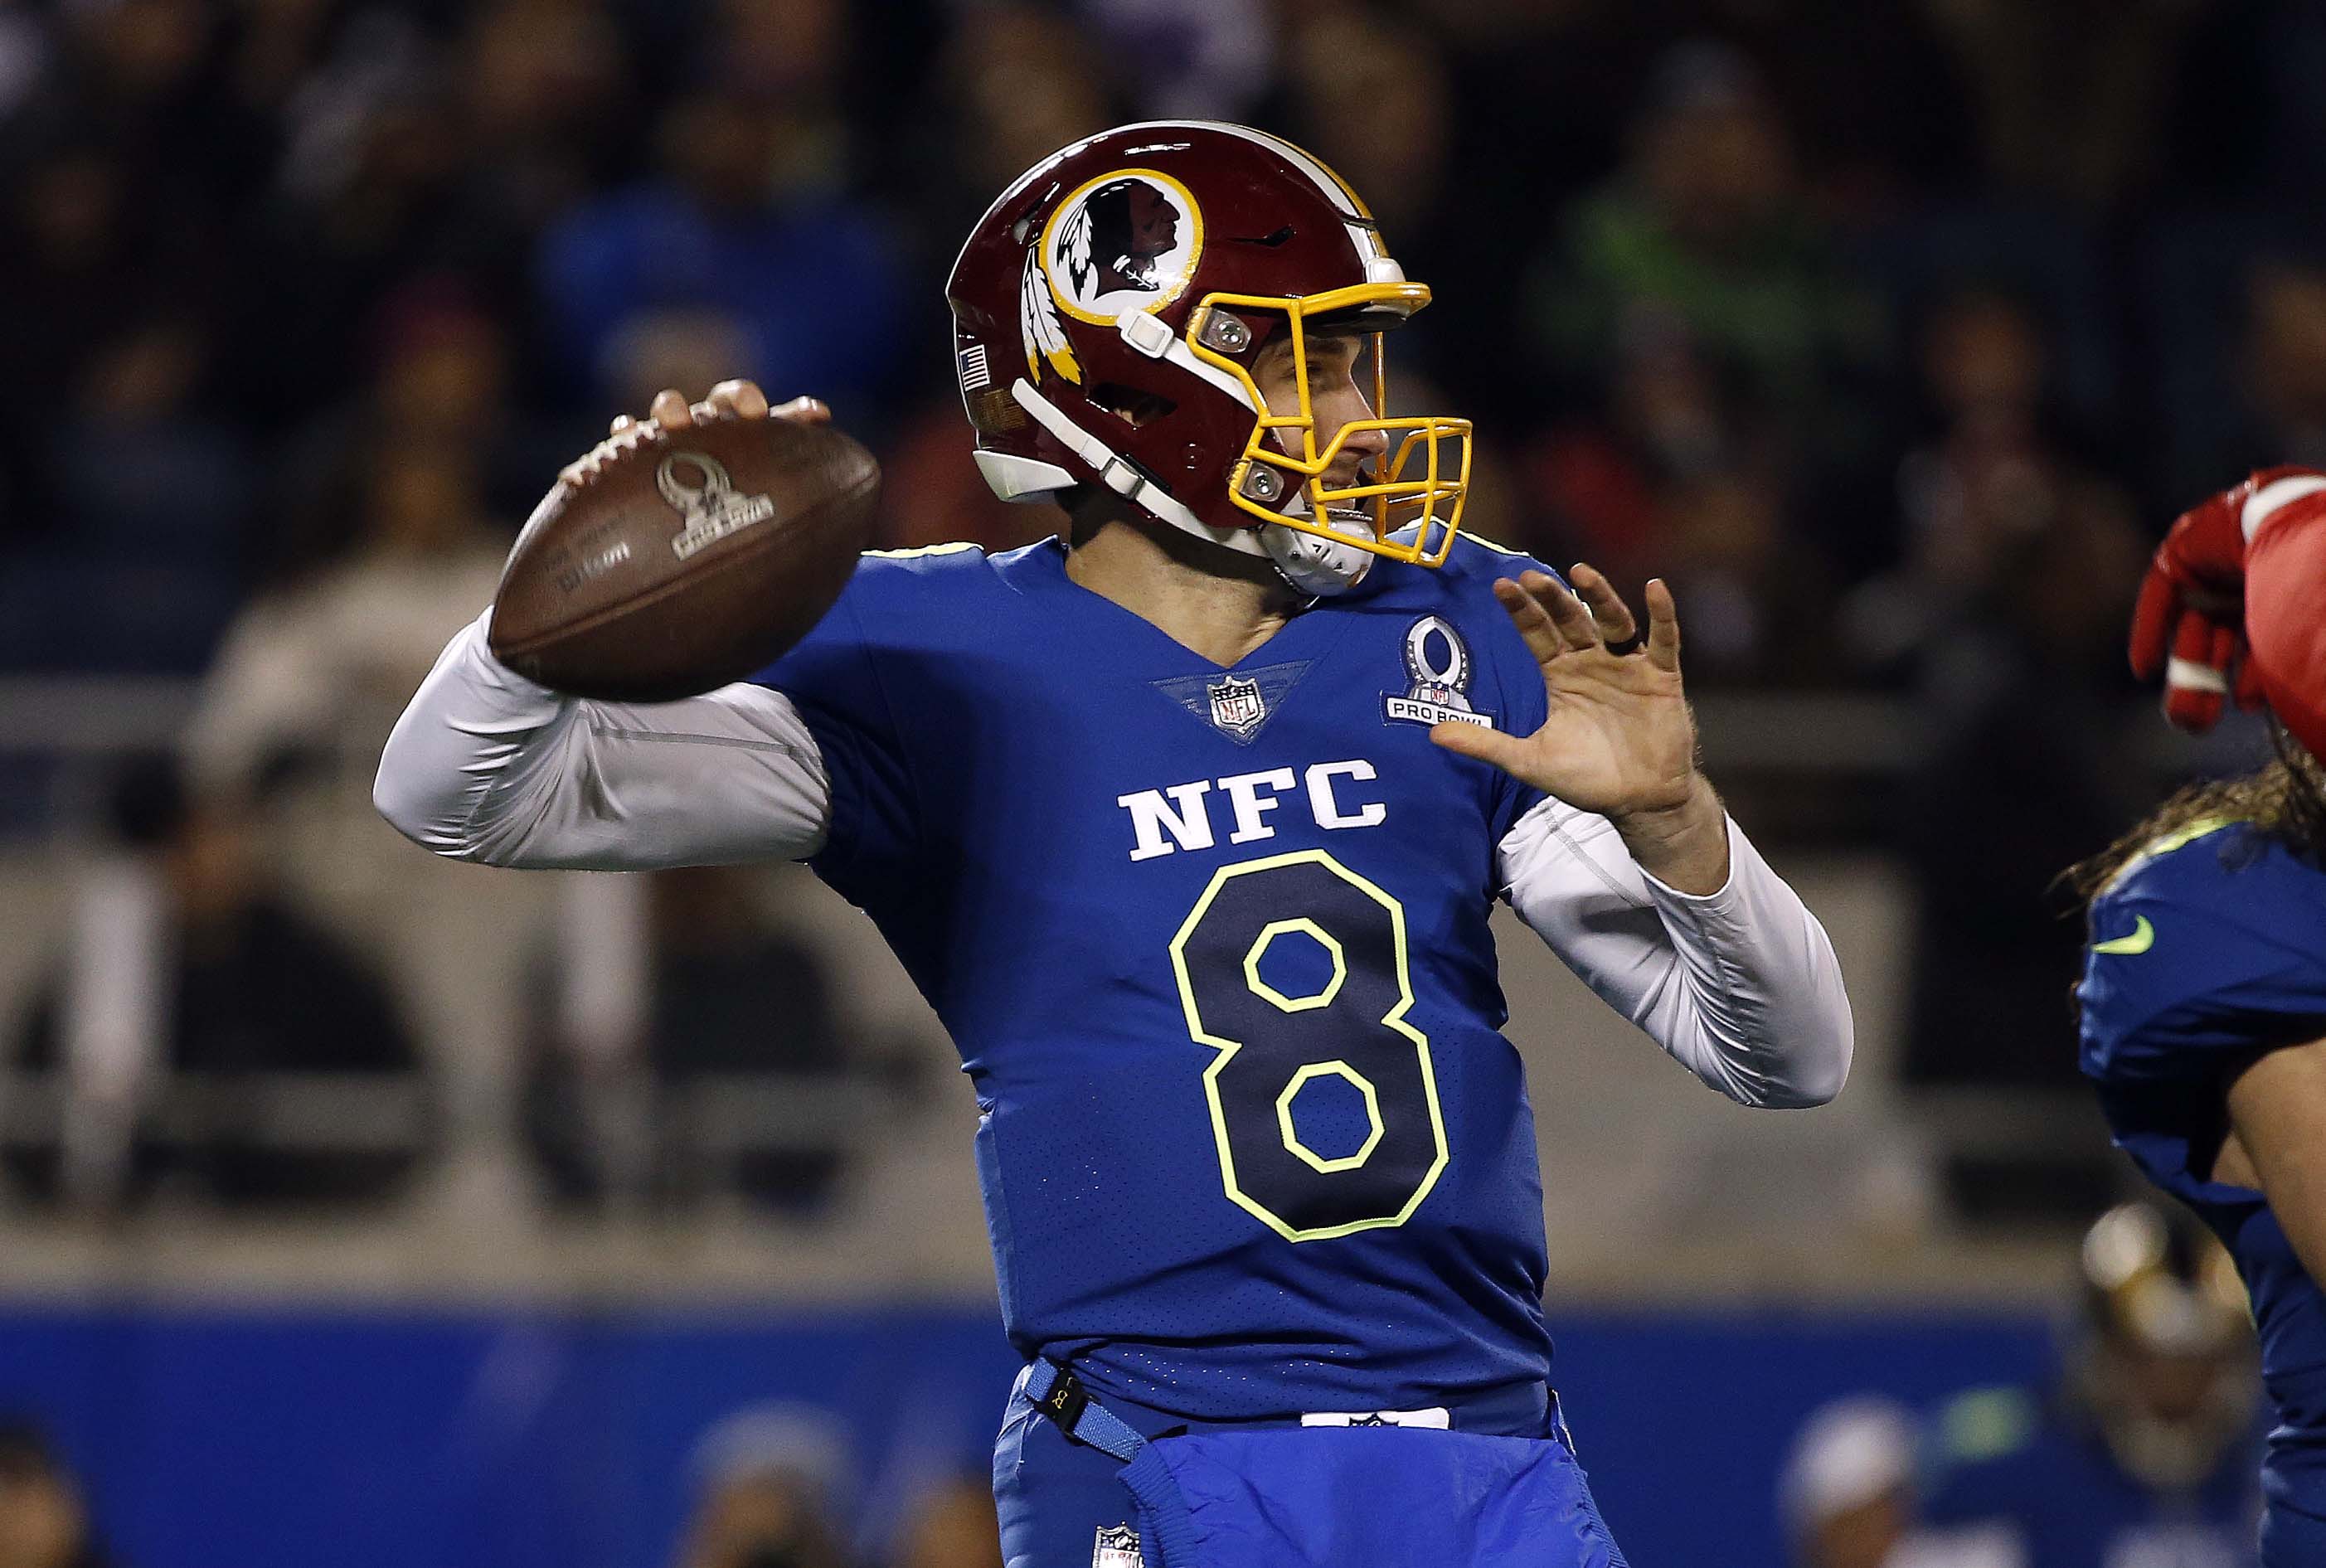 AFC holds on to defeat NFC 20-13 in Pro Bowl